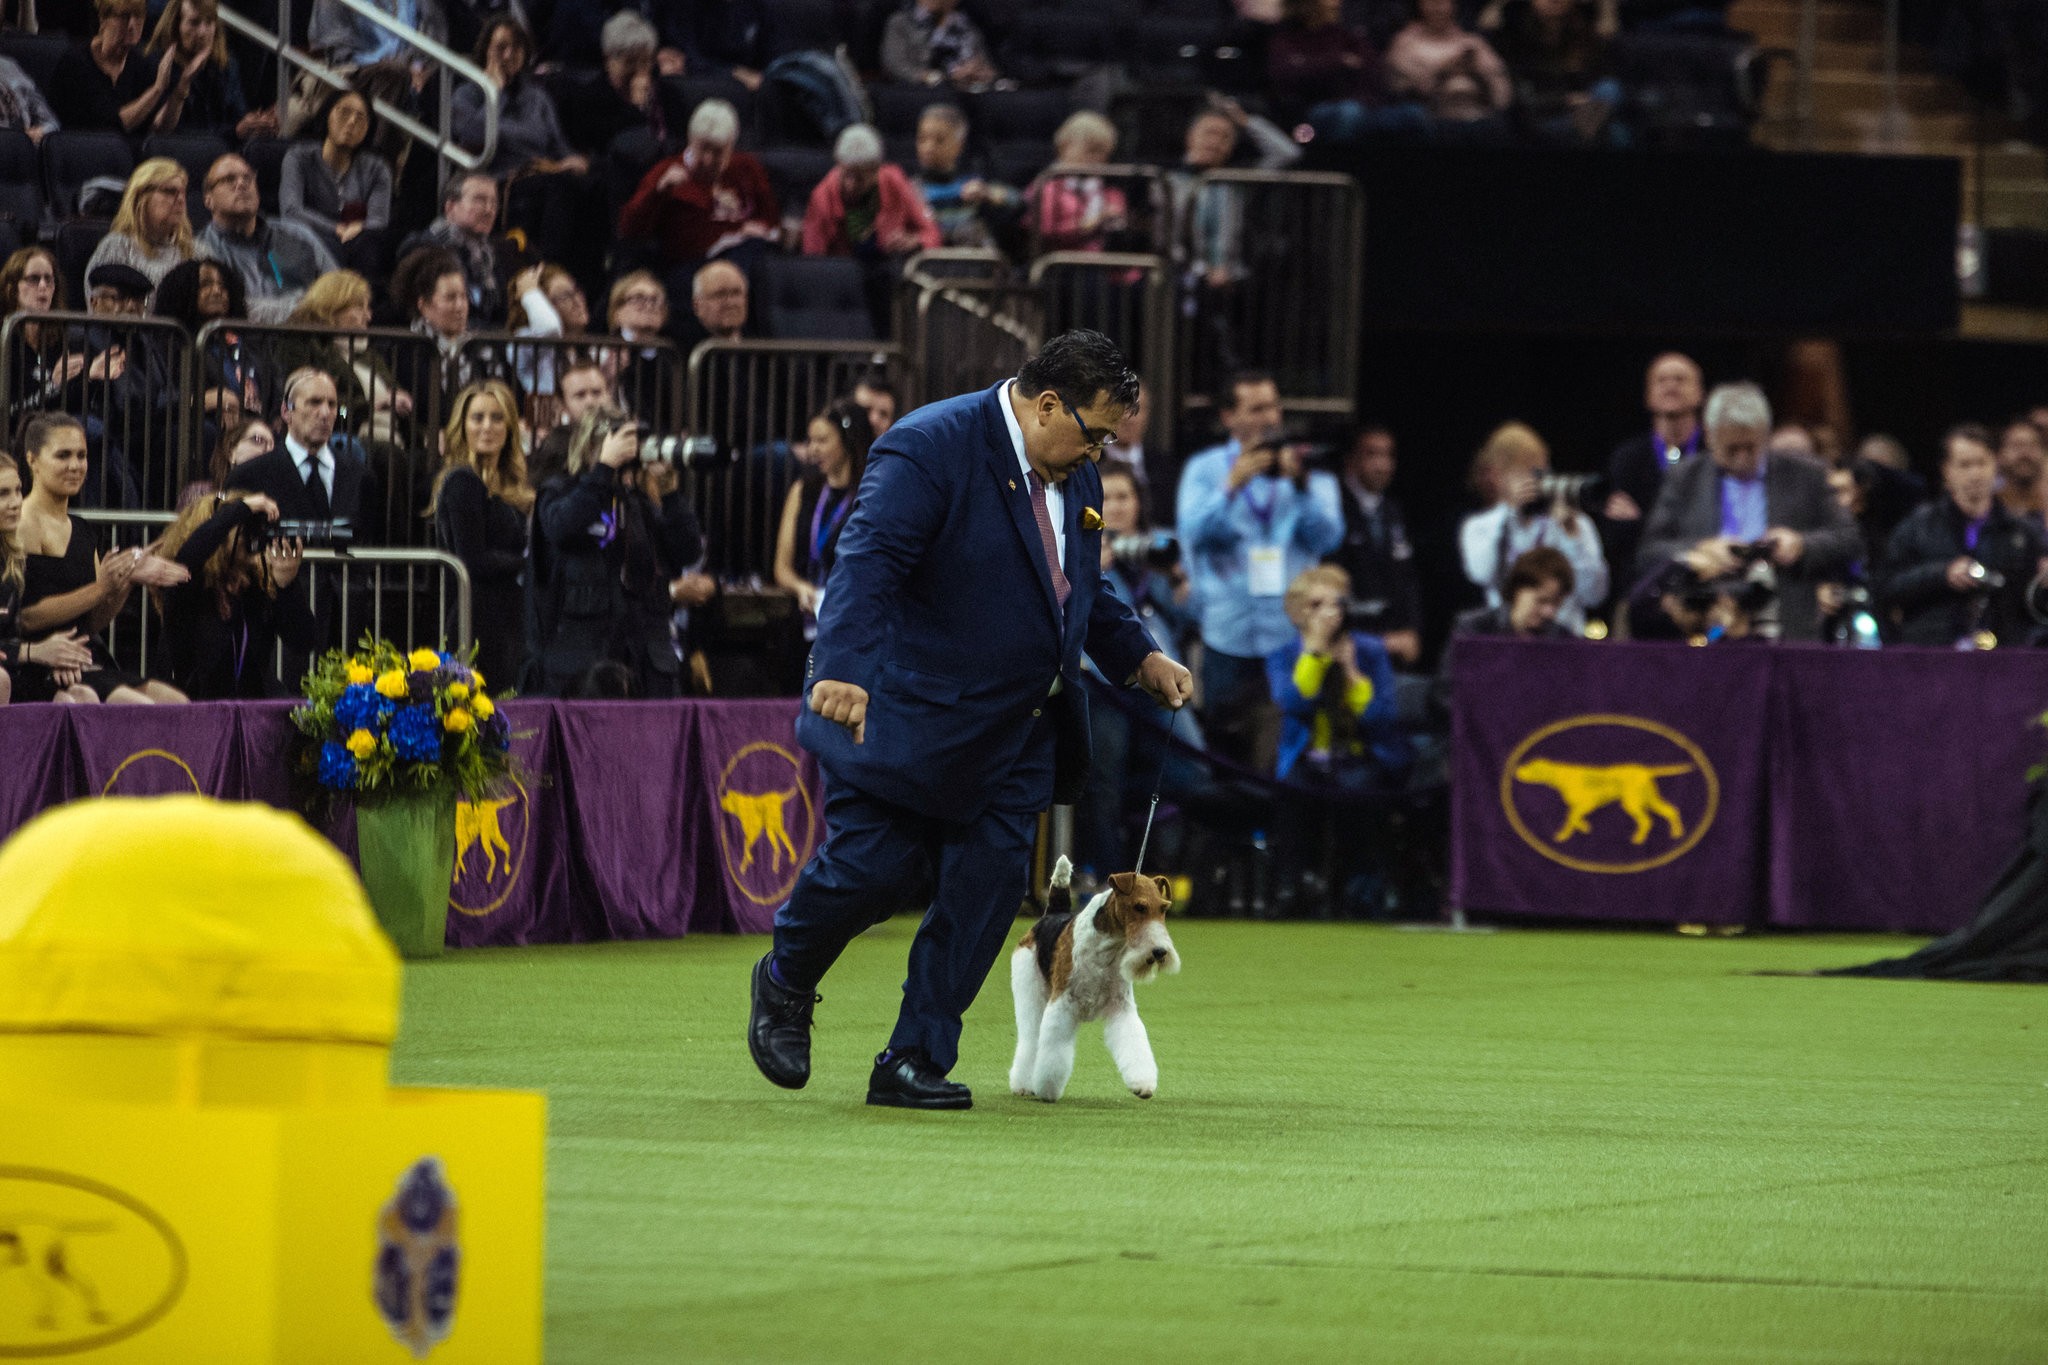 Westminster Dog Show King Continues Terriers’ Reign